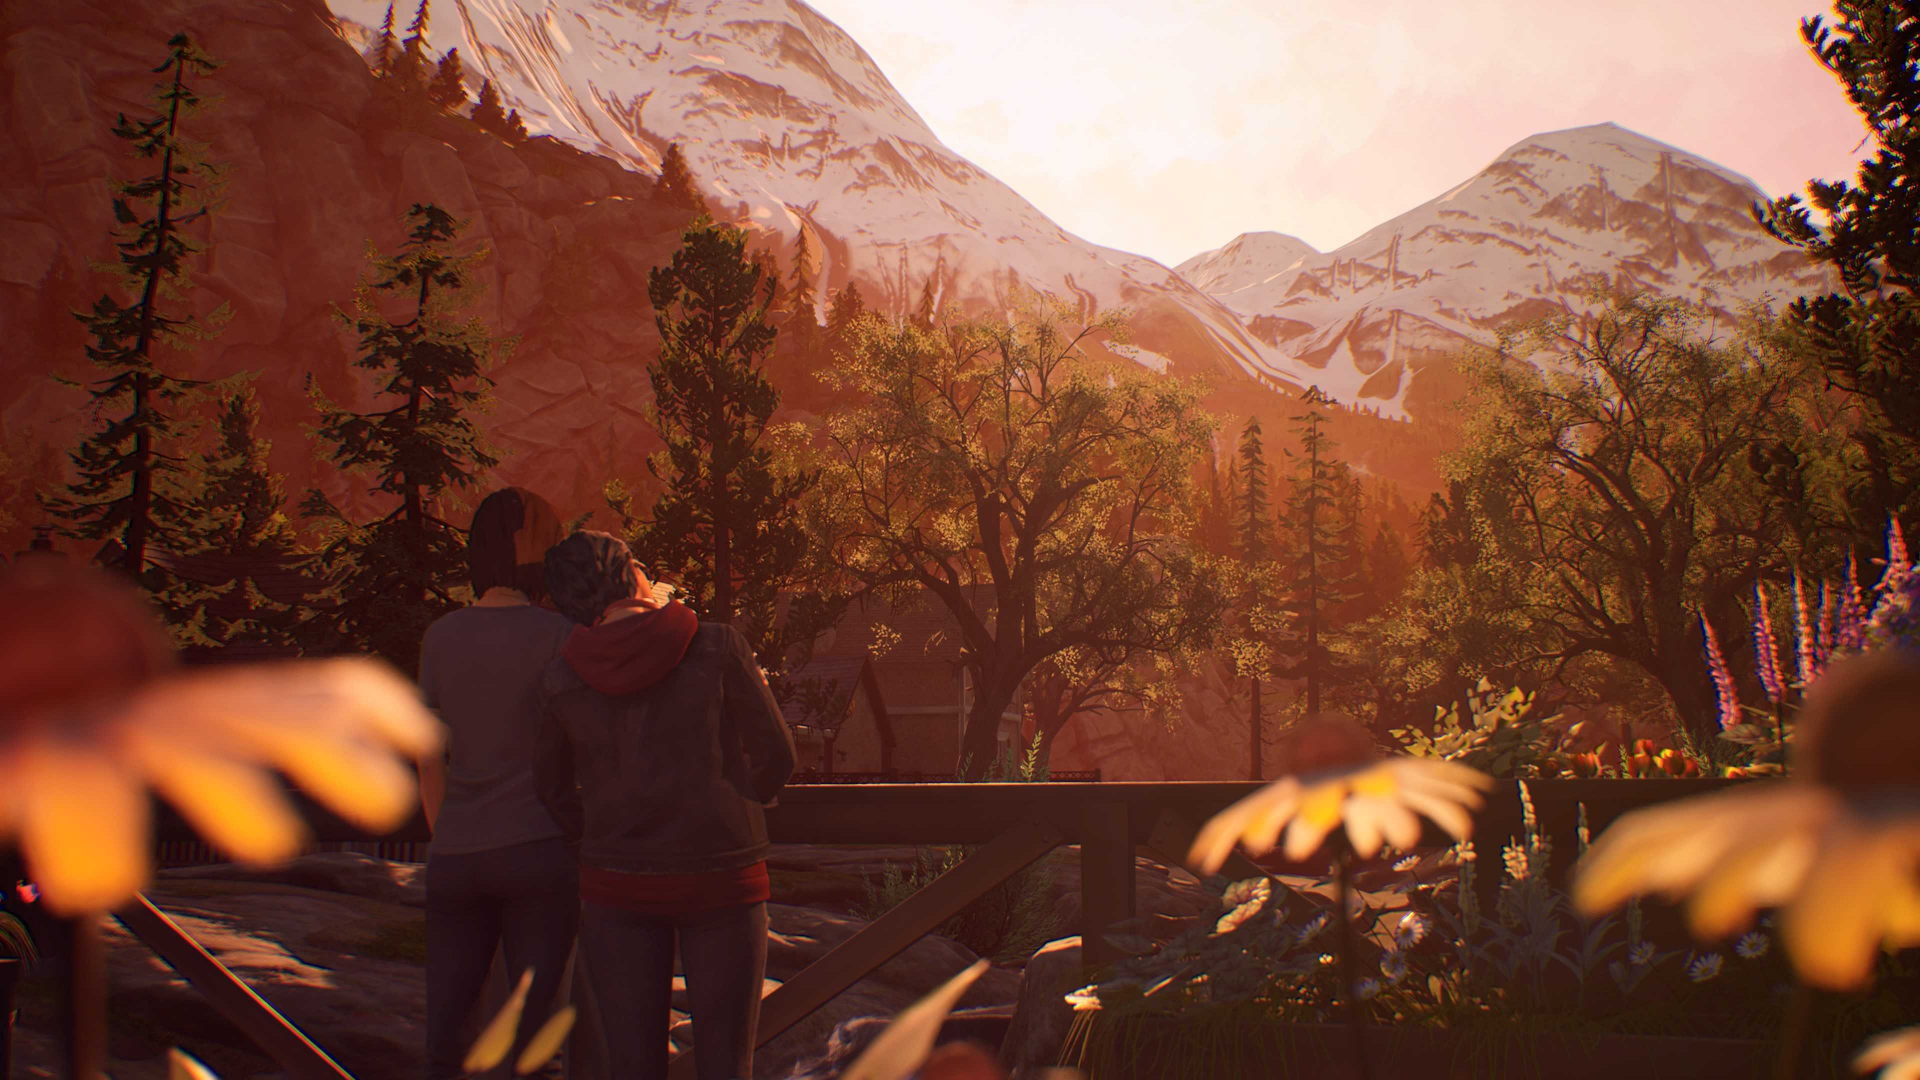 Life Is Strange: True Colors Review - Shining Through